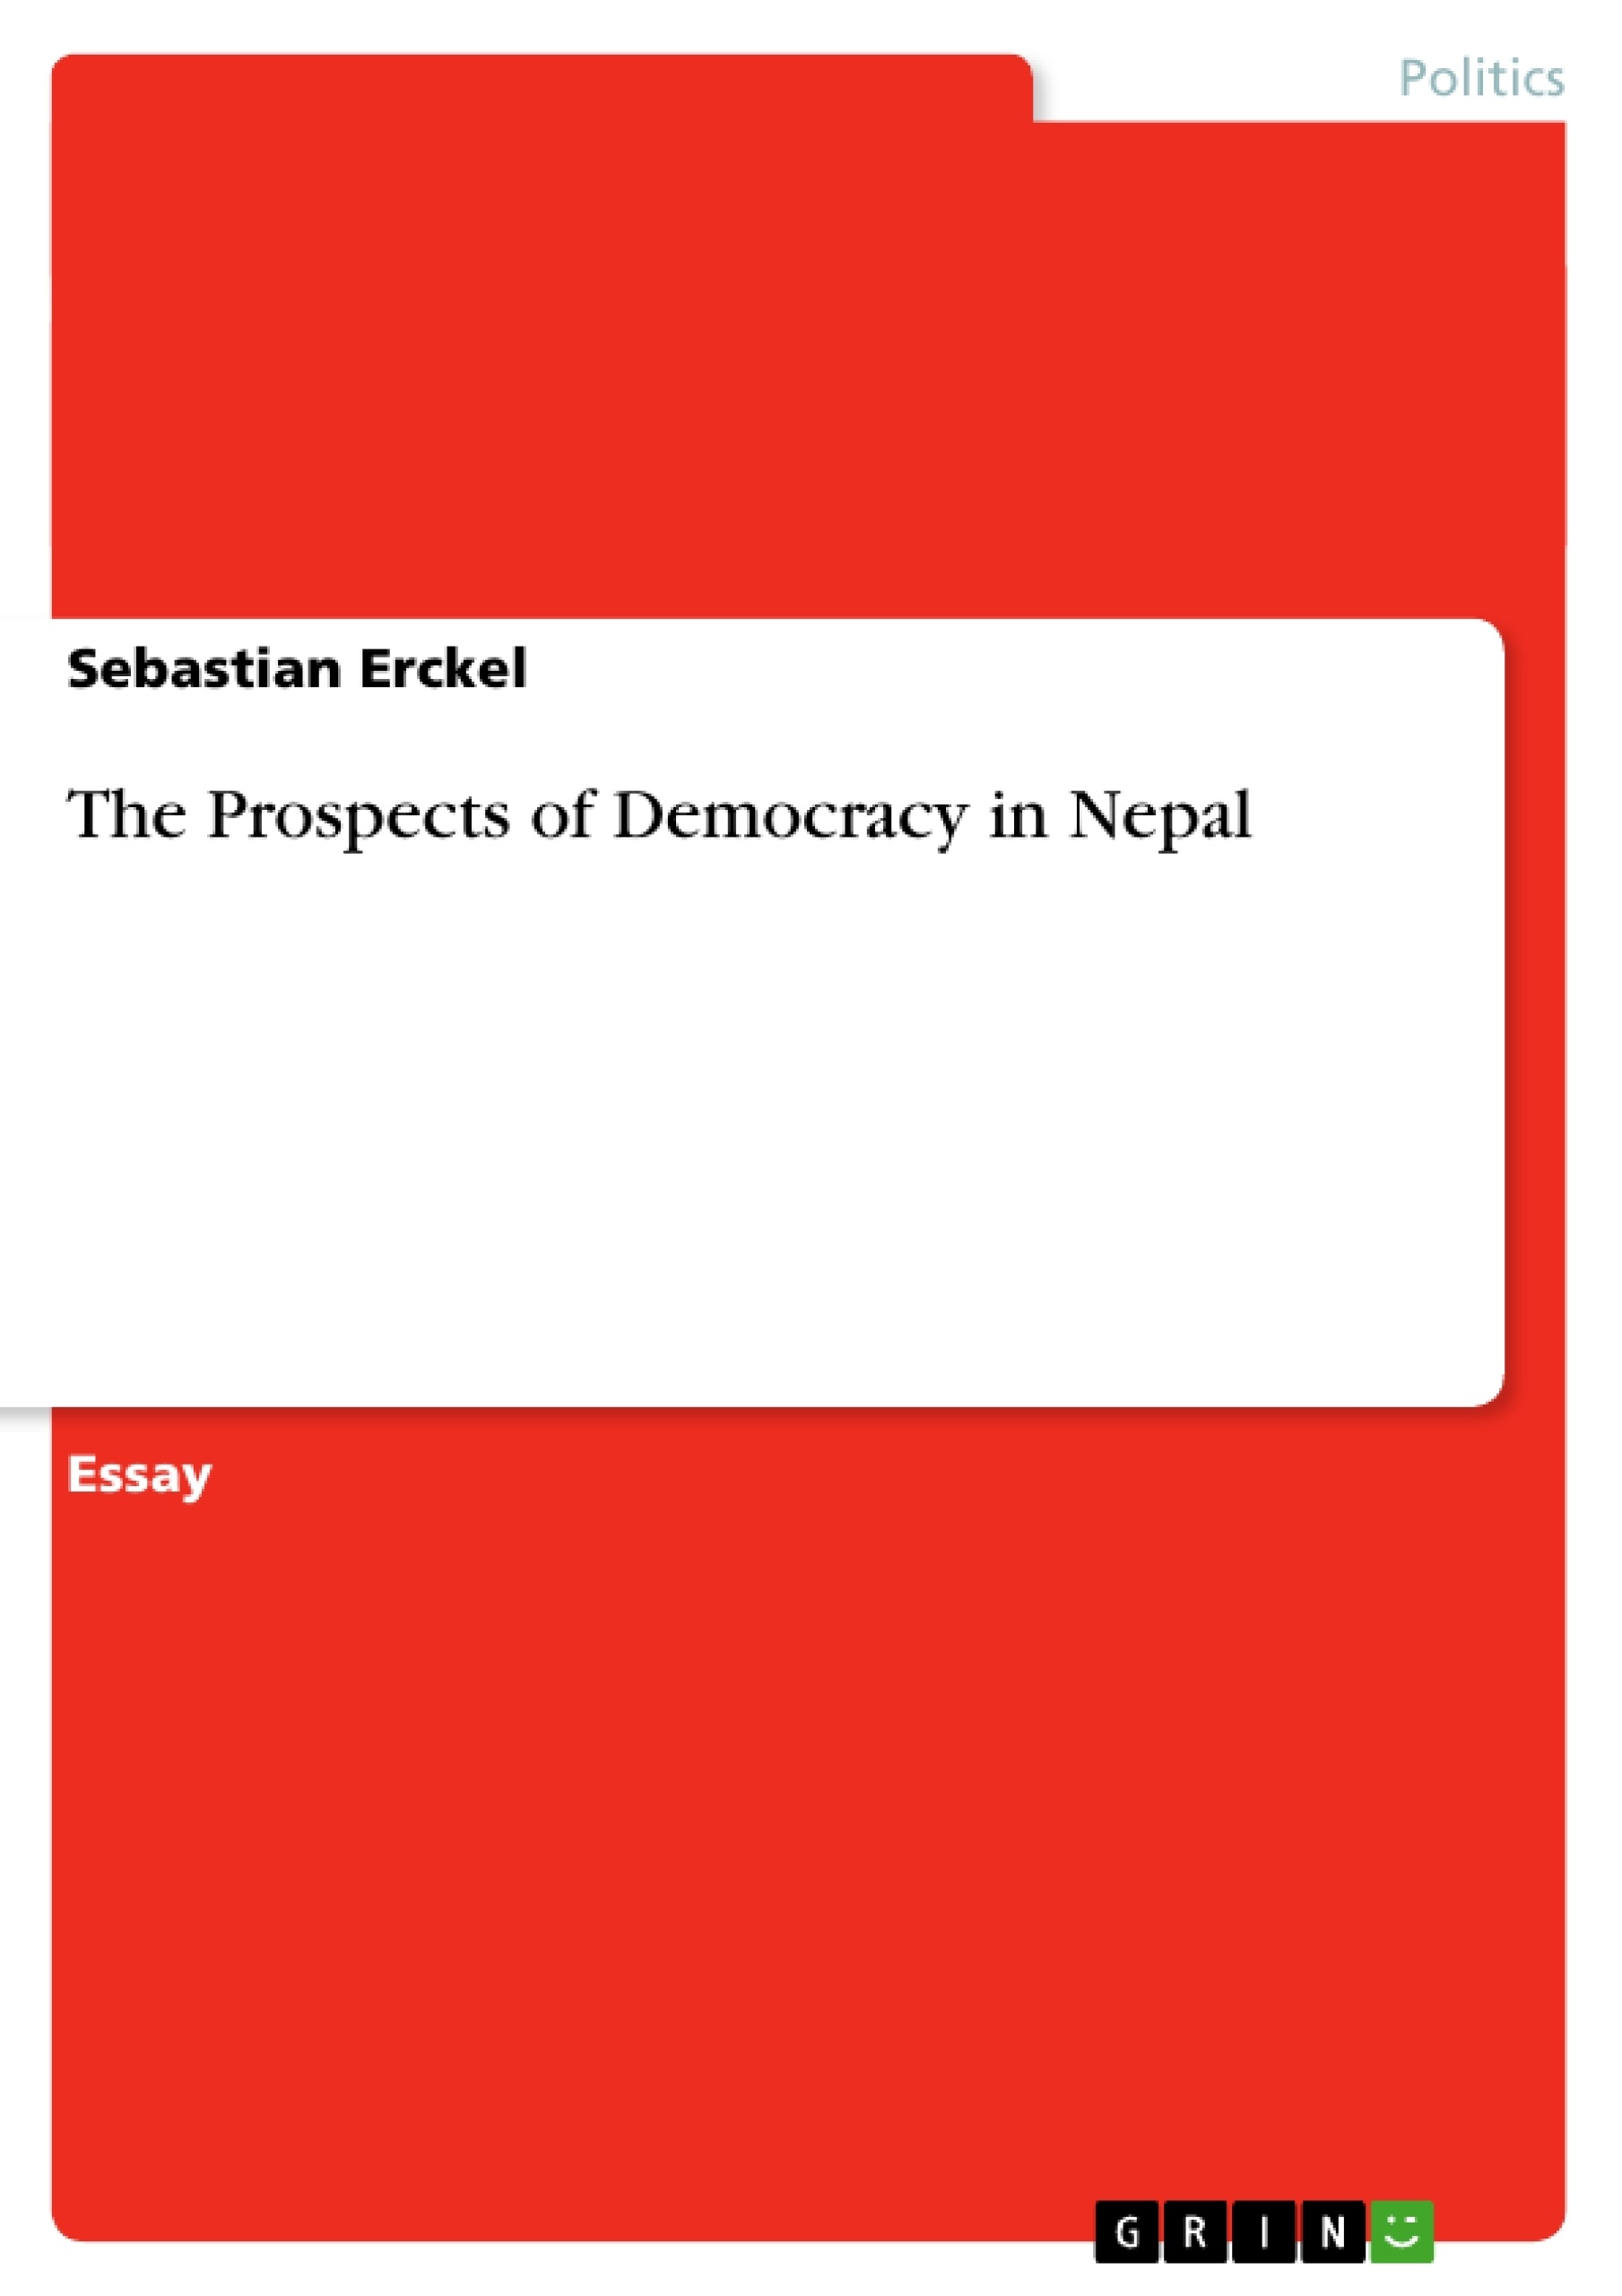 Title: The Prospects of Democracy in Nepal